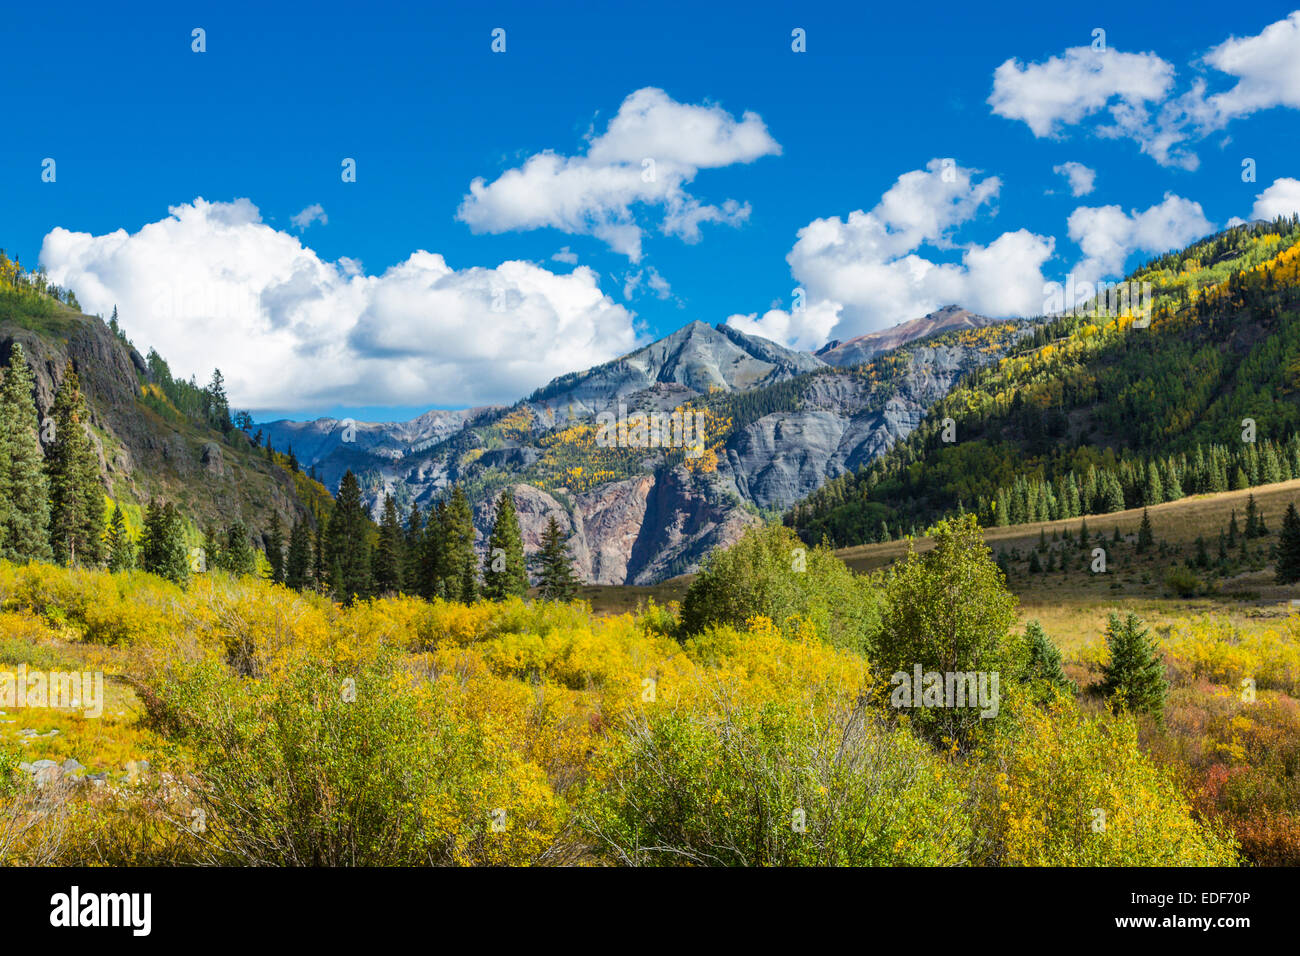 View along Route 550 San Juan Skyway Scenic Byway or Million Dollar Highway in Colorado Stock Photo